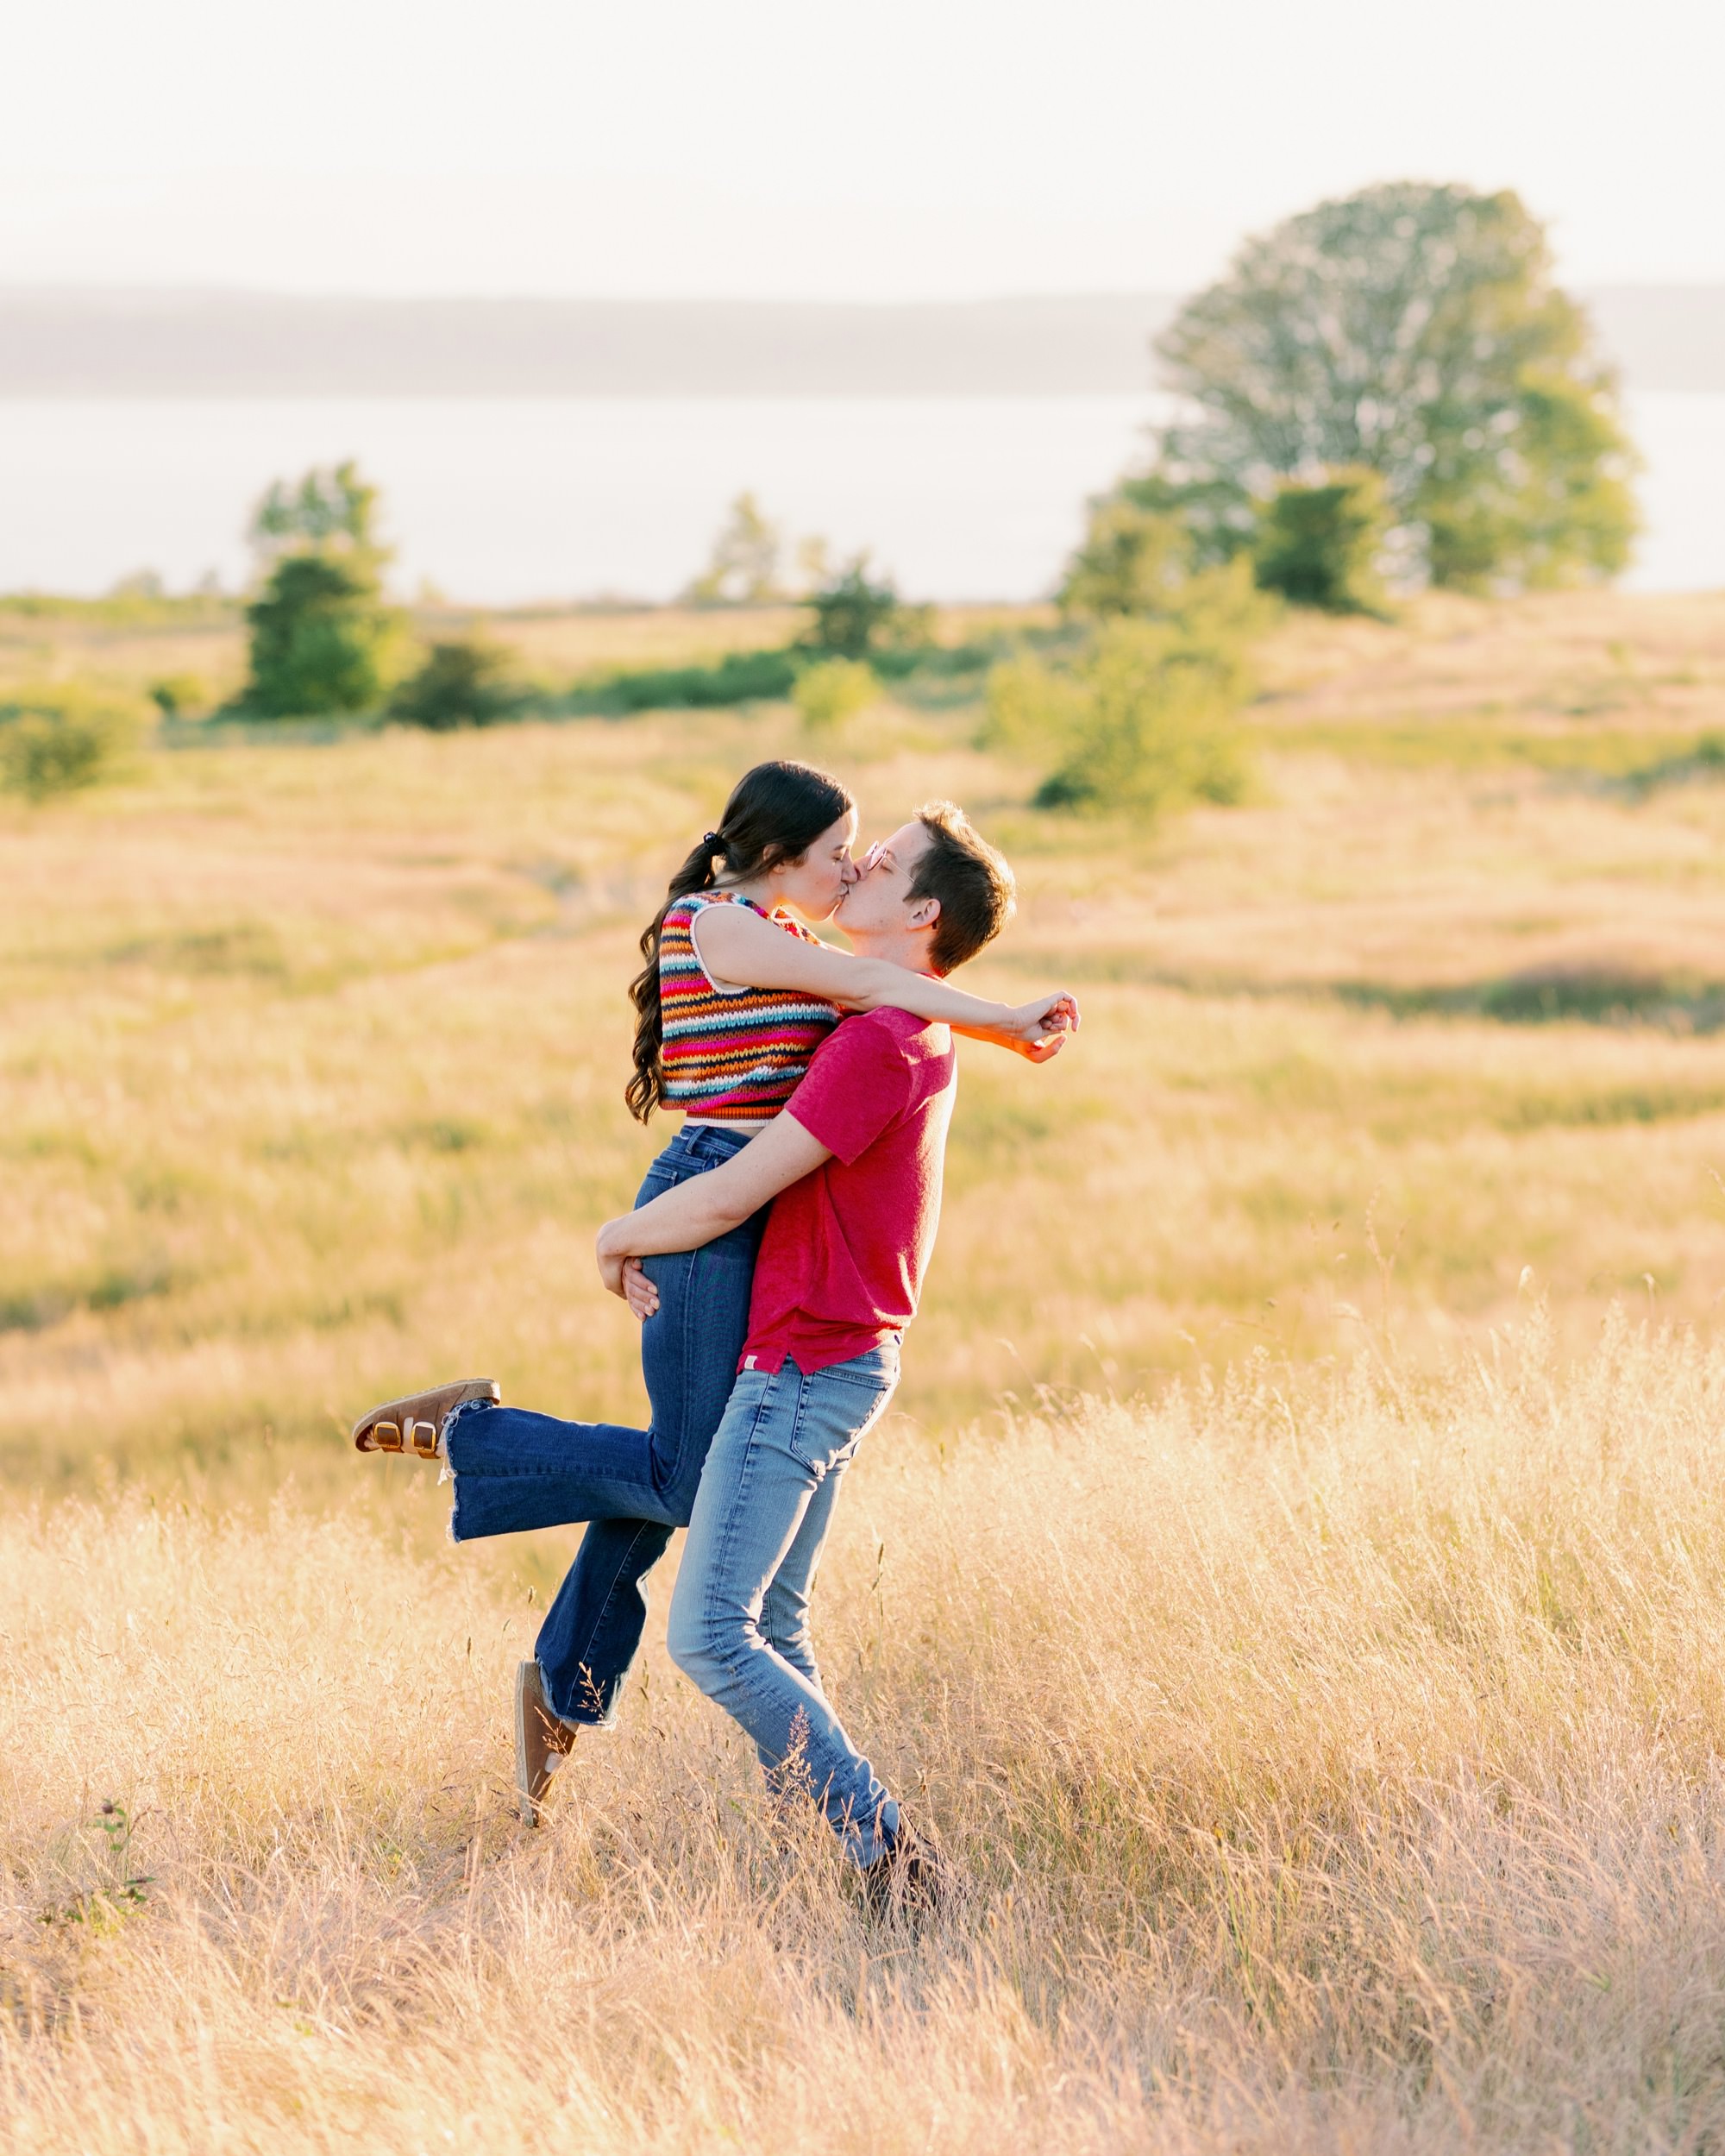 A man lifting his partner in a sunny field, both sharing a kiss and enjoying the sunset.